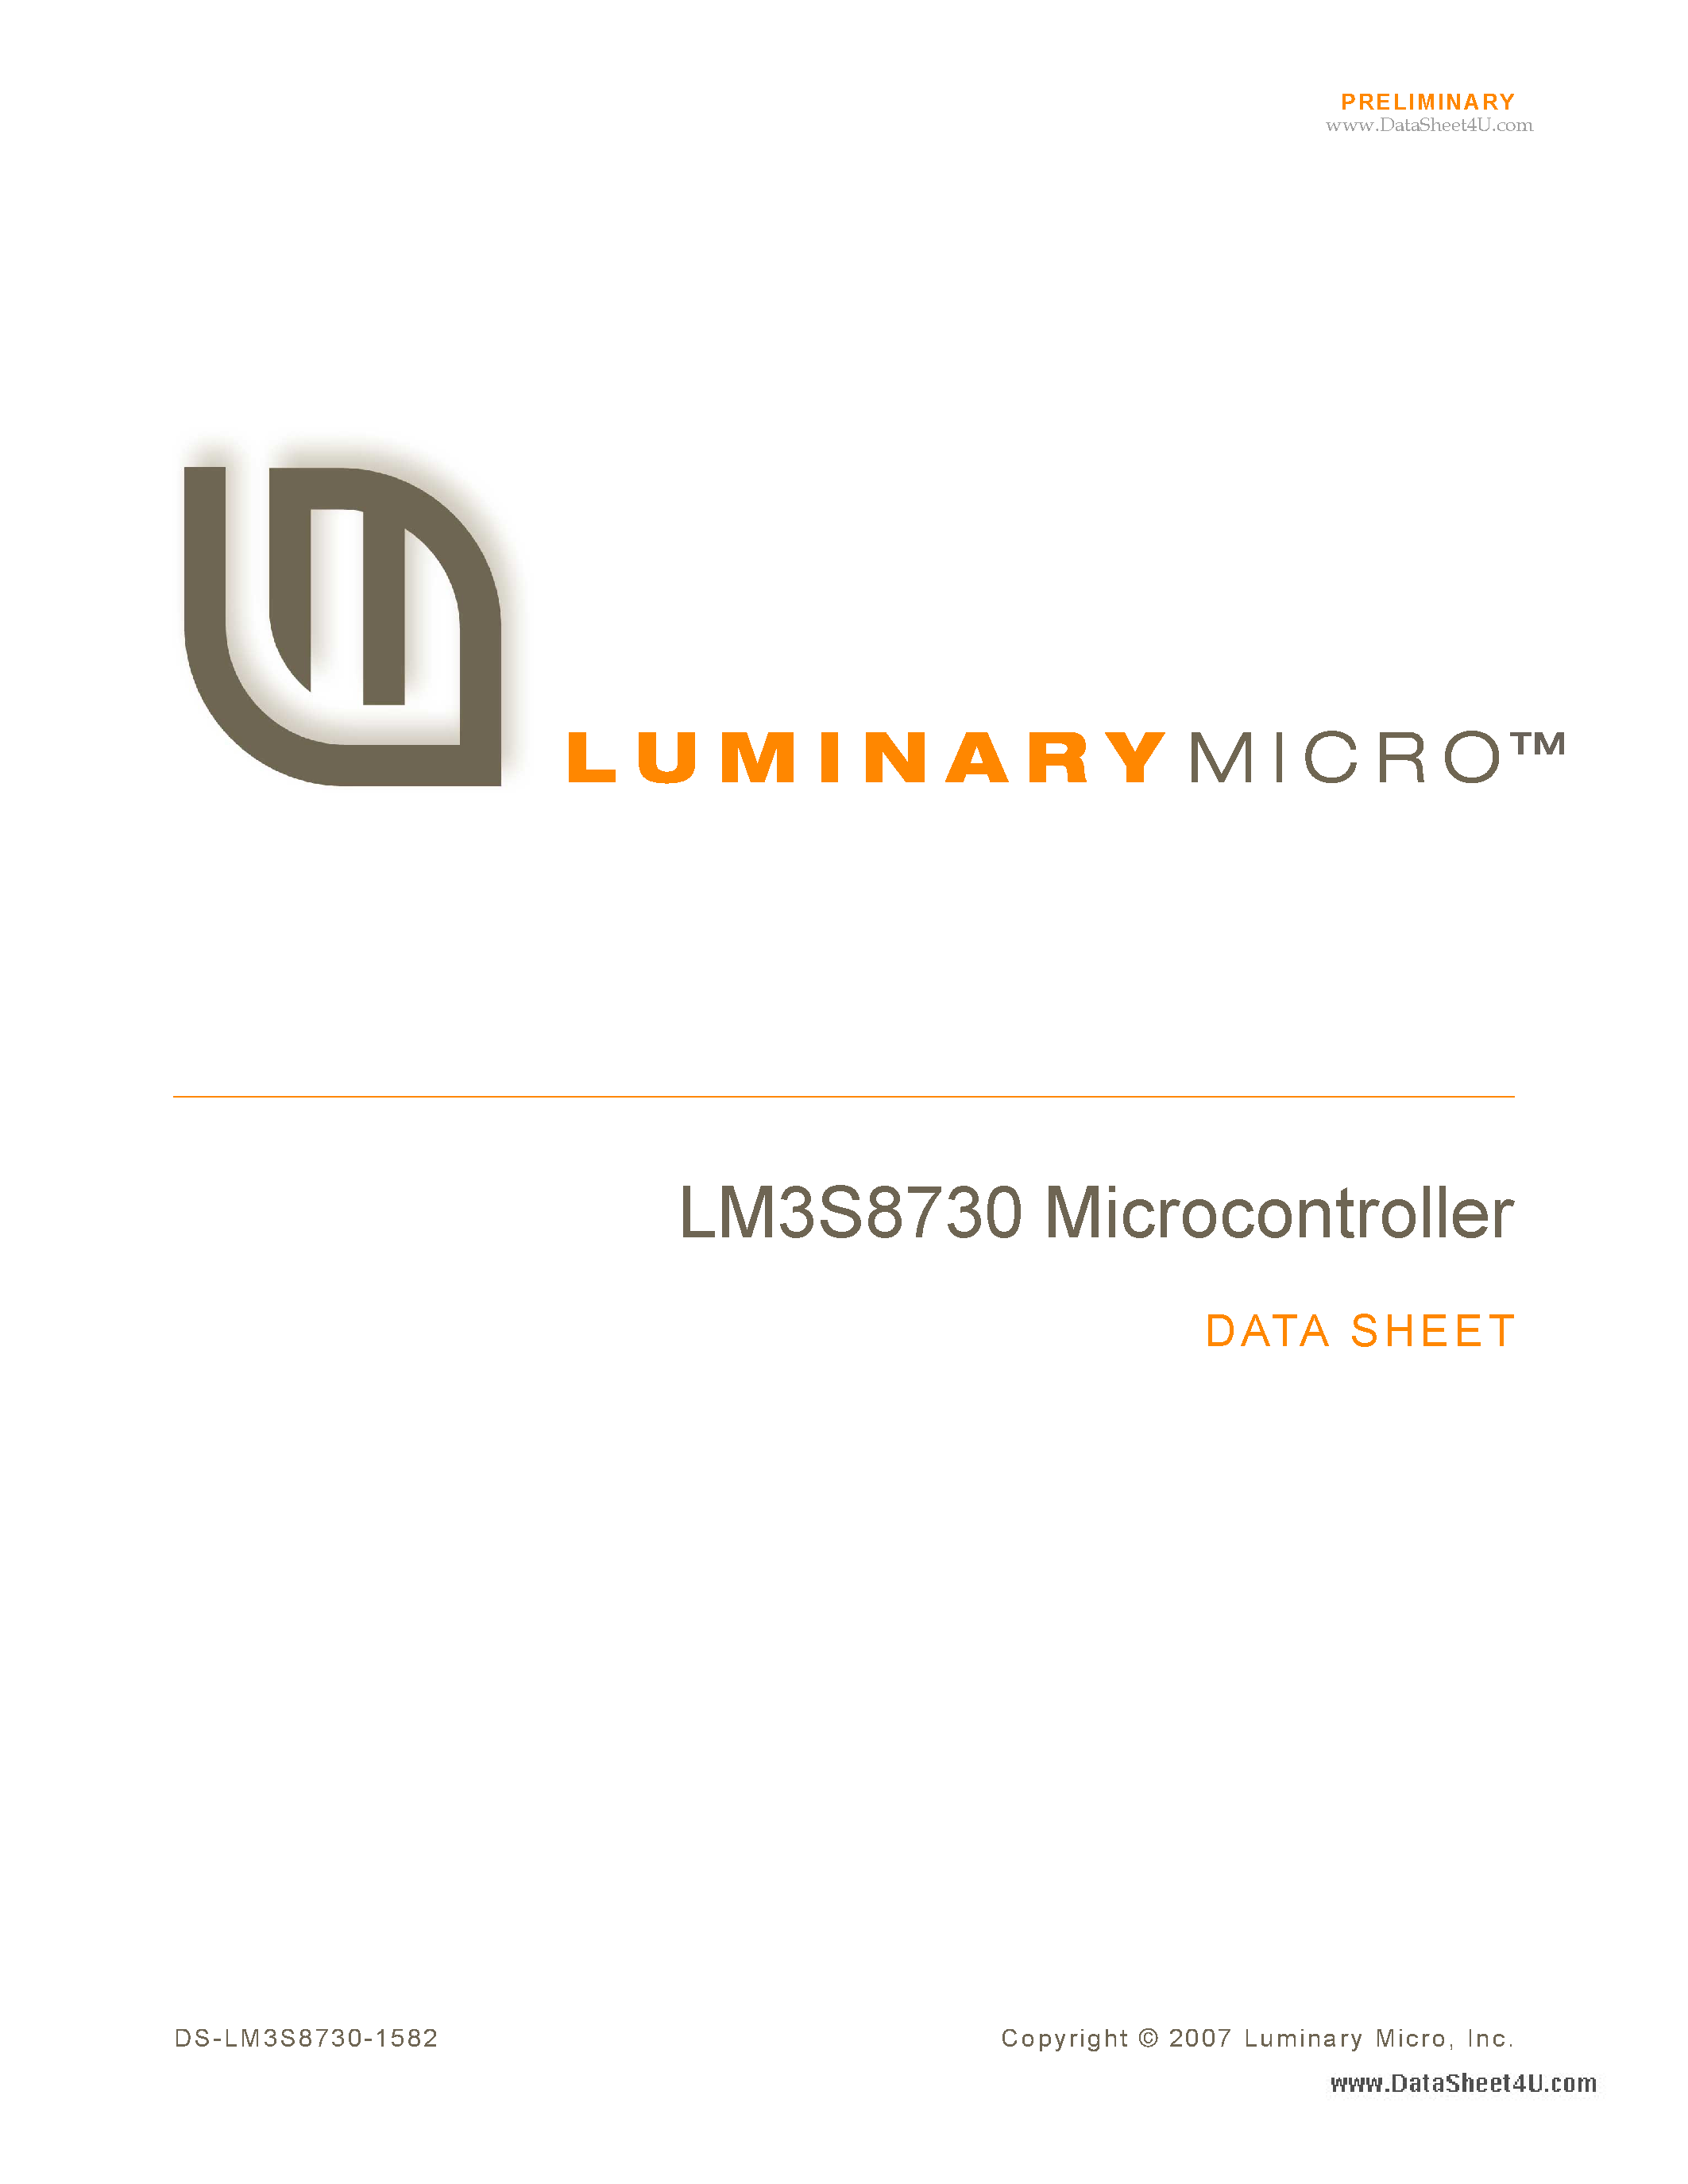 Datasheet LM3S8730 - Microcontroller page 1